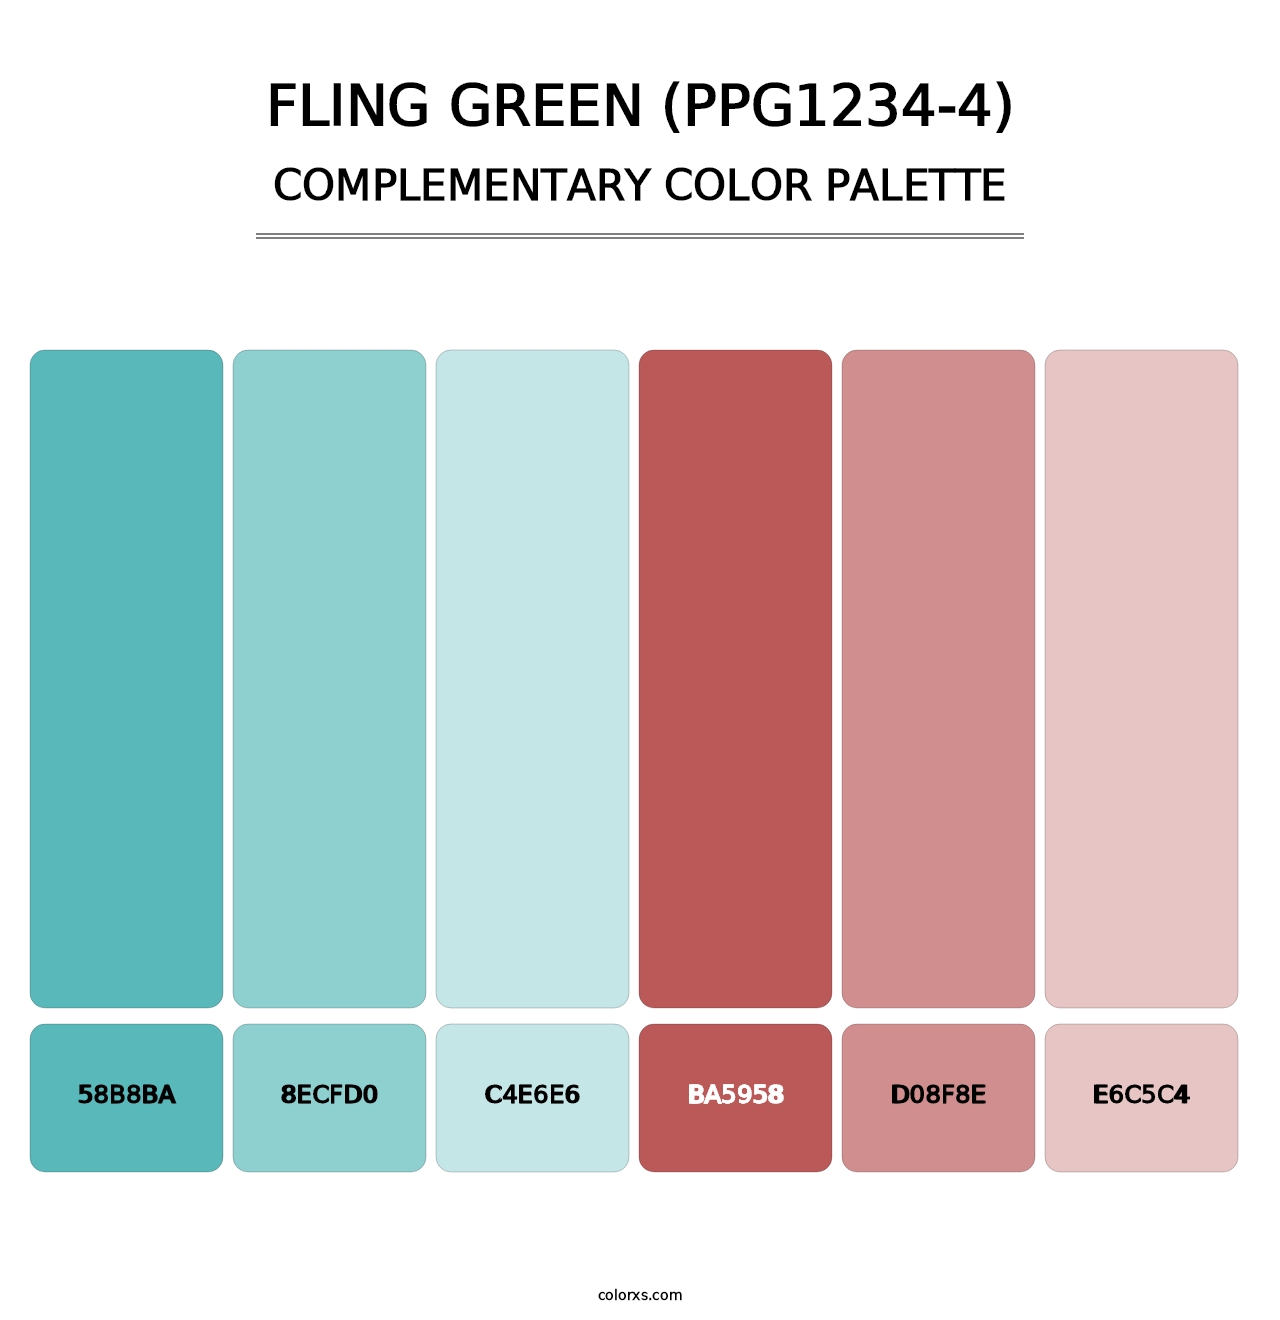 Fling Green (PPG1234-4) - Complementary Color Palette